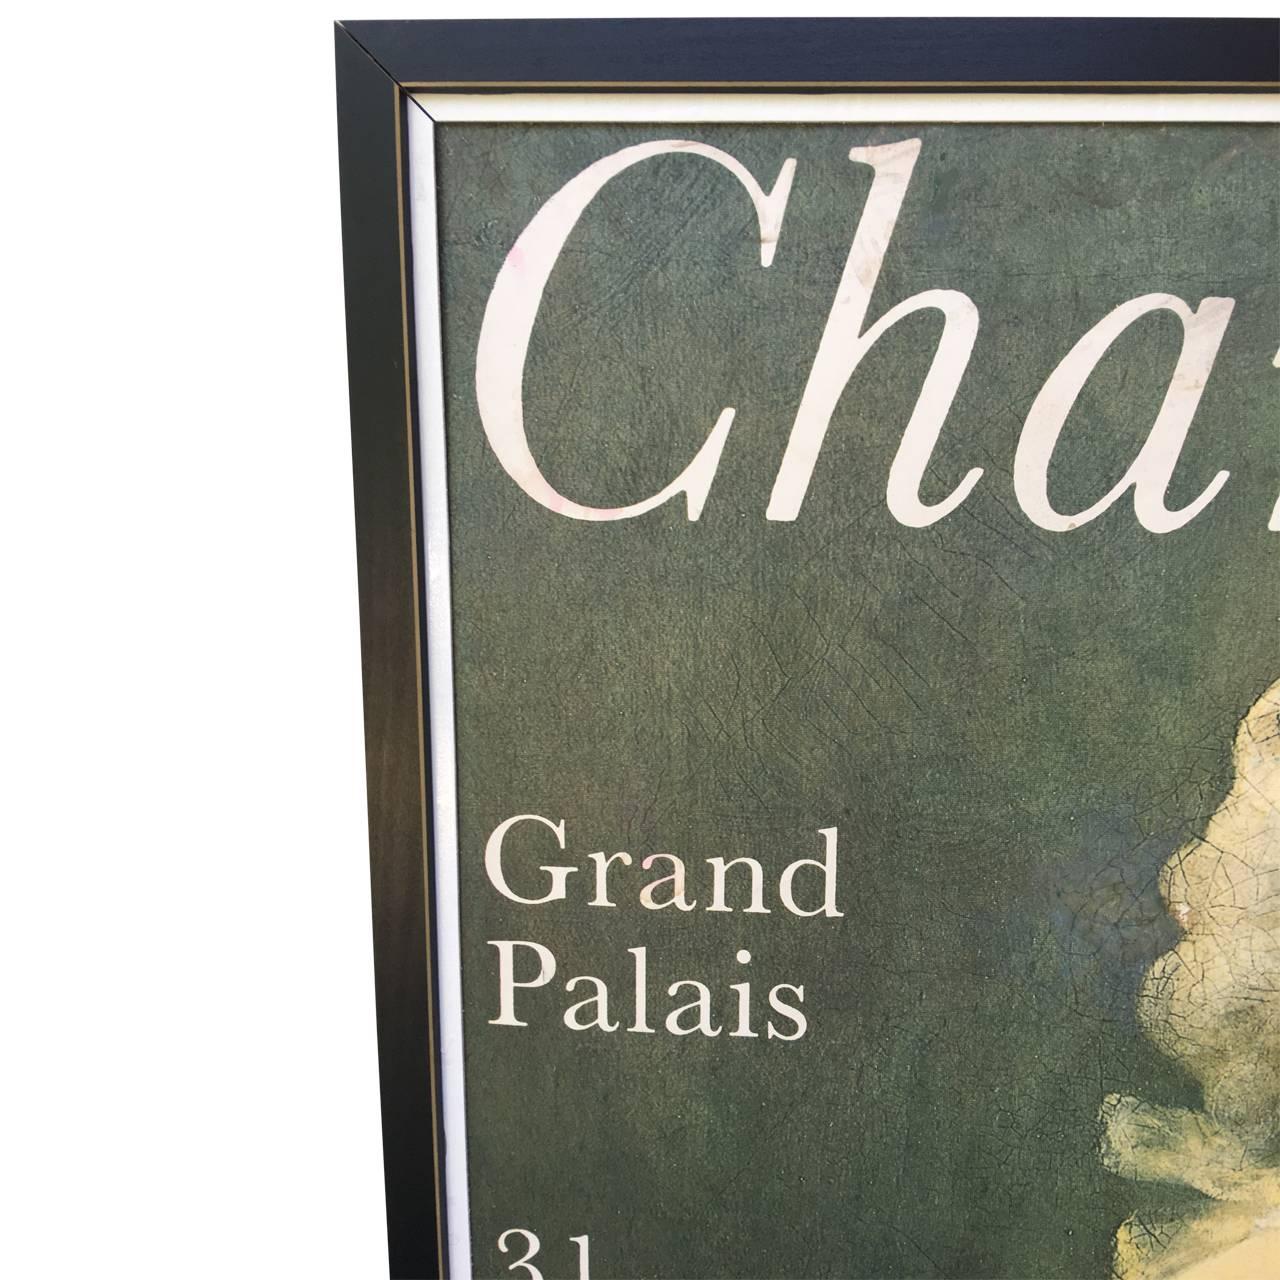 Grand French art fair poster from the 1979 Chardin Grand Palais show.